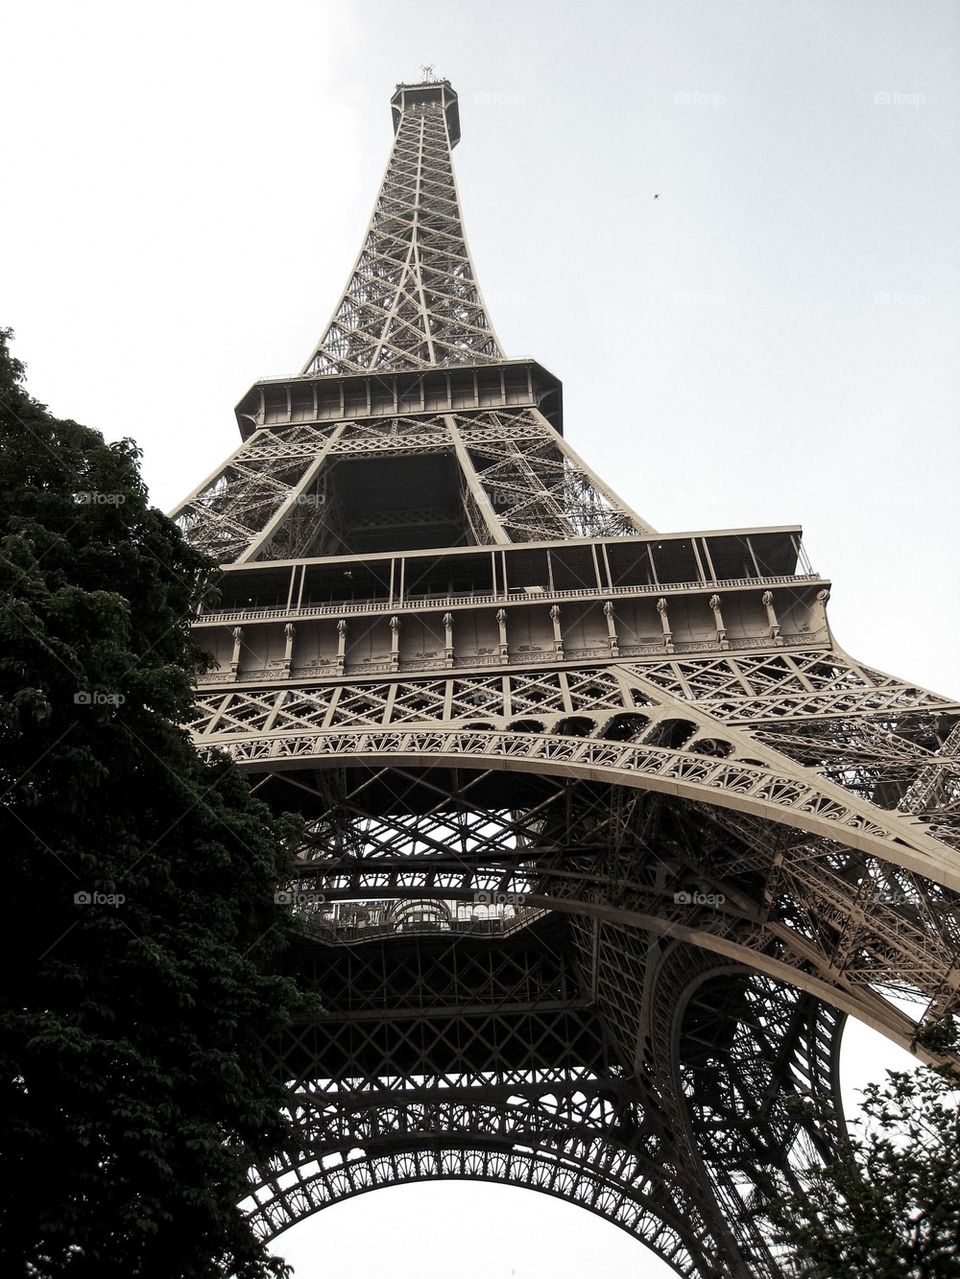 Low angle view of Eiffel Tower